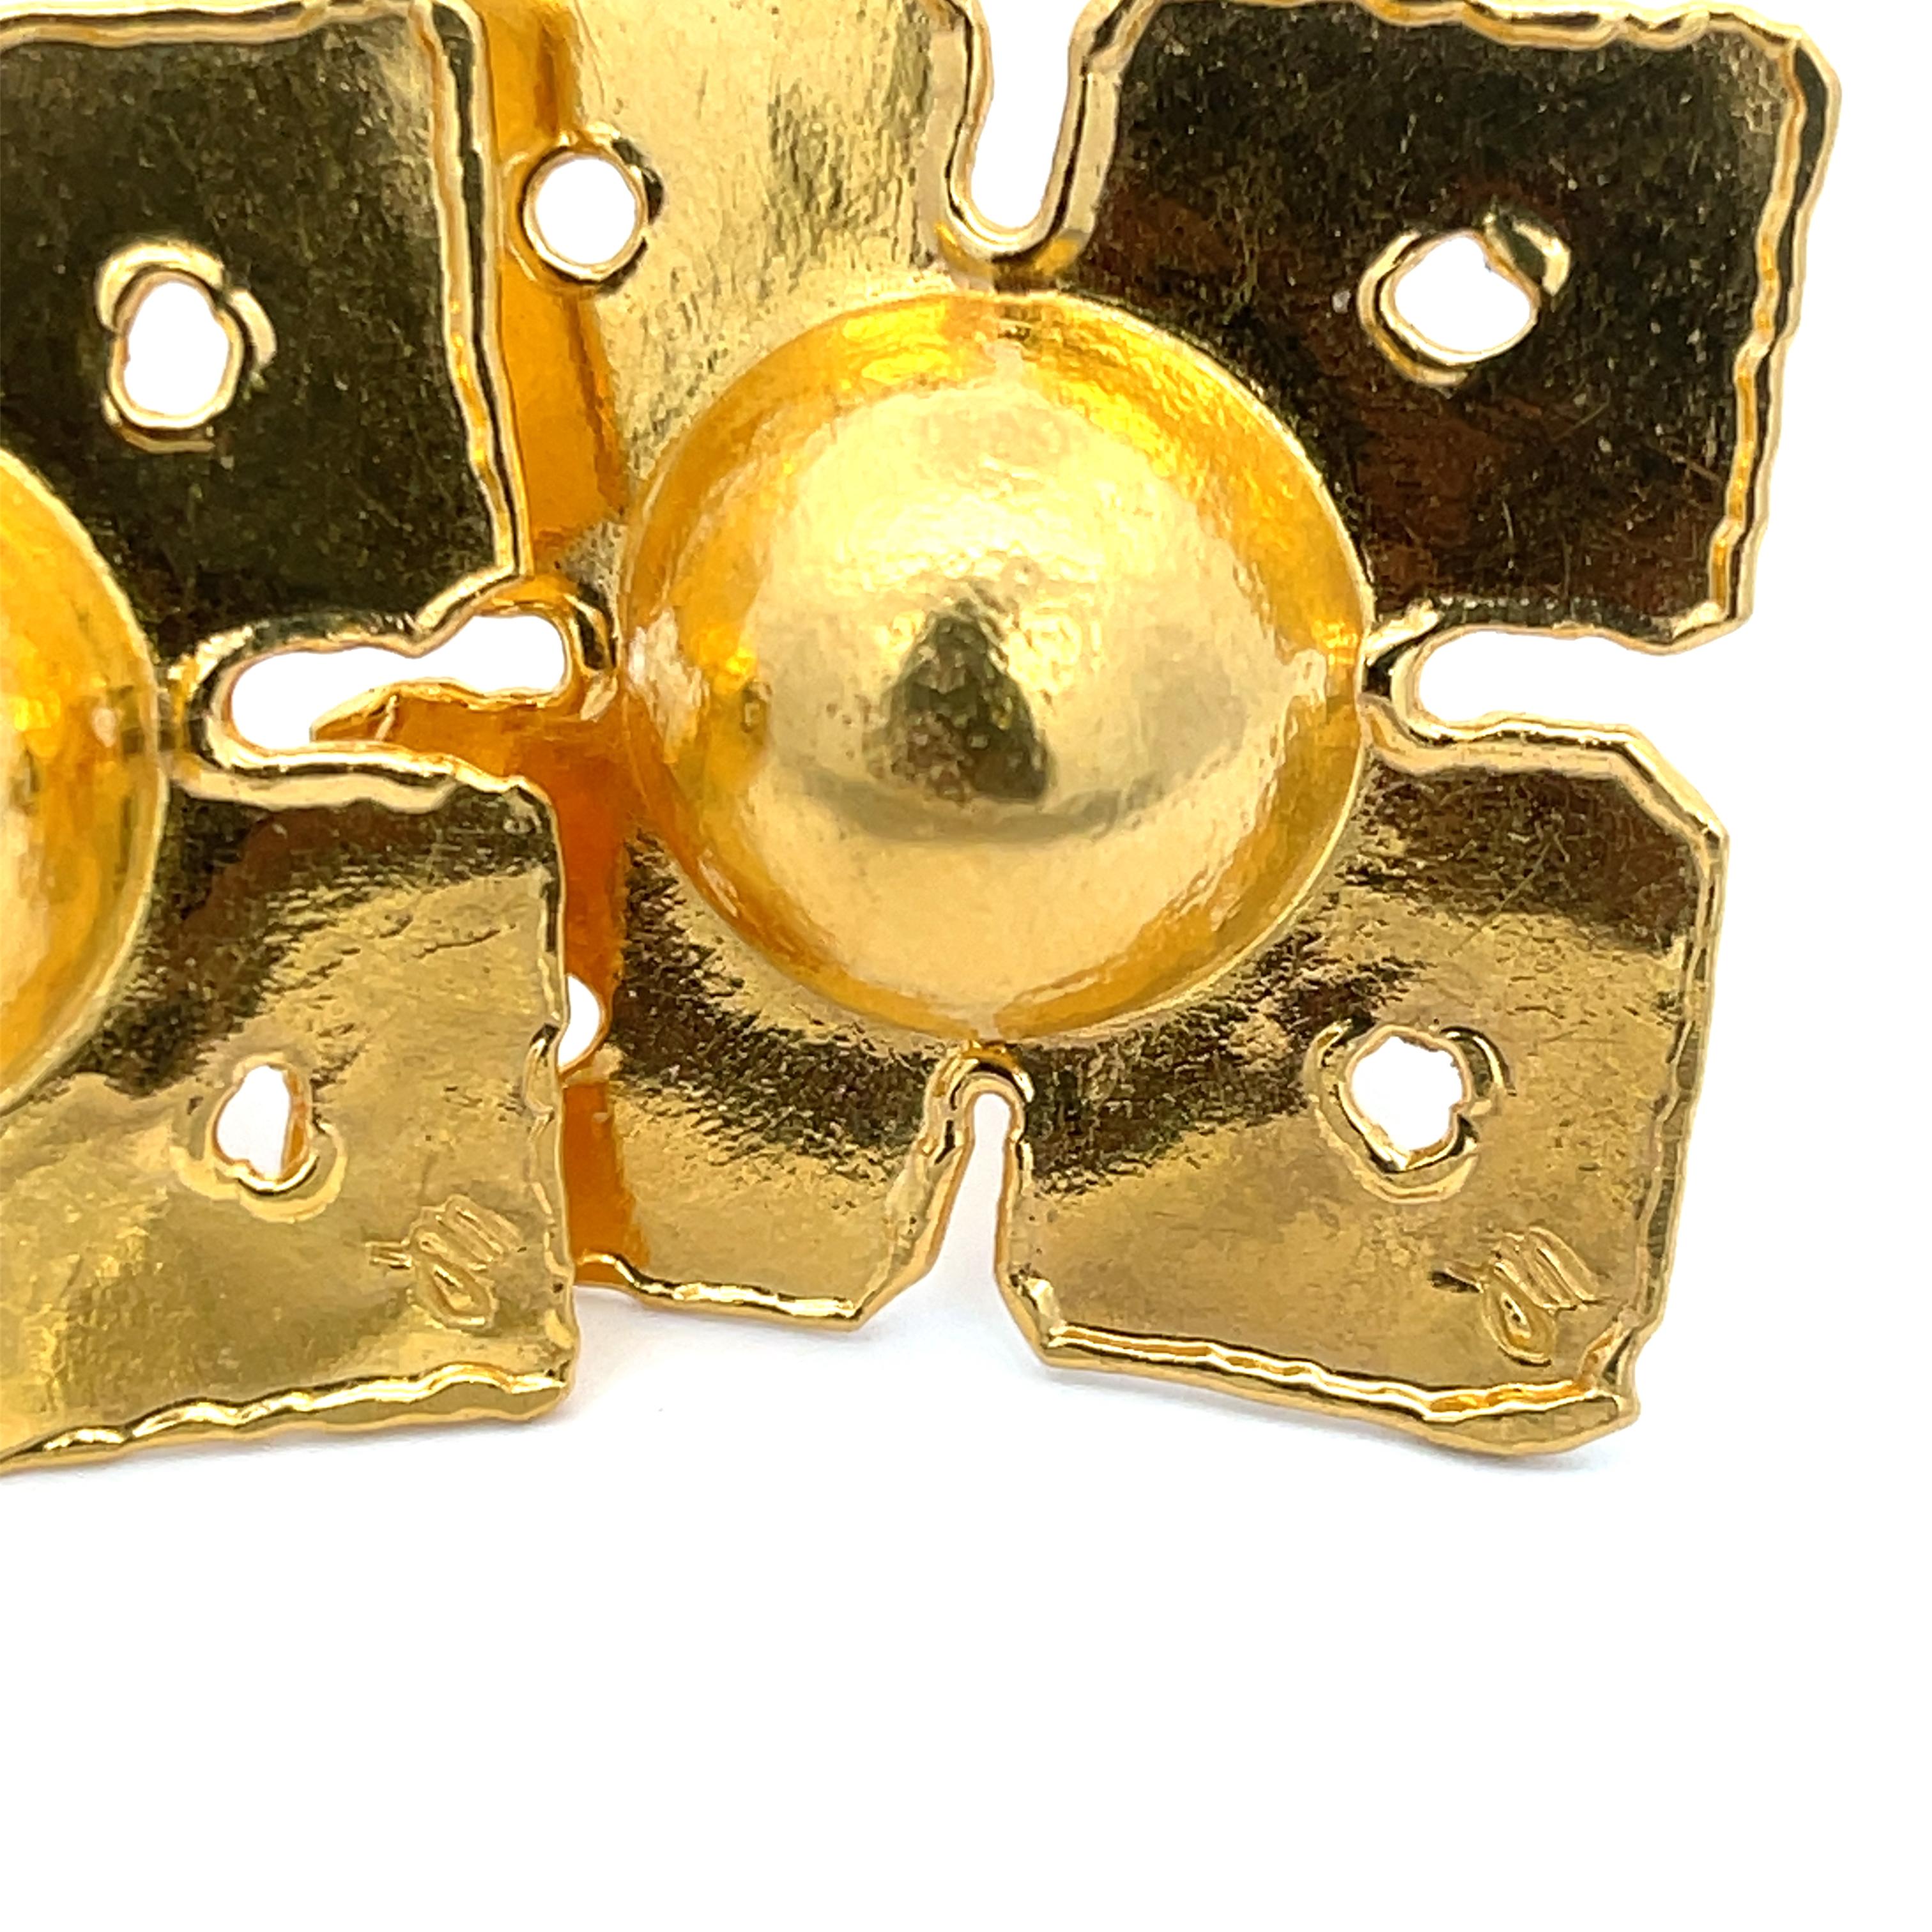 Jean Mahie Square Clip-On Earrings in 22K Yellow Gold. The earrings are about 1 inch by 1 inch in dimension and weigh 18.2 grams. Hallmark JM and 22K.